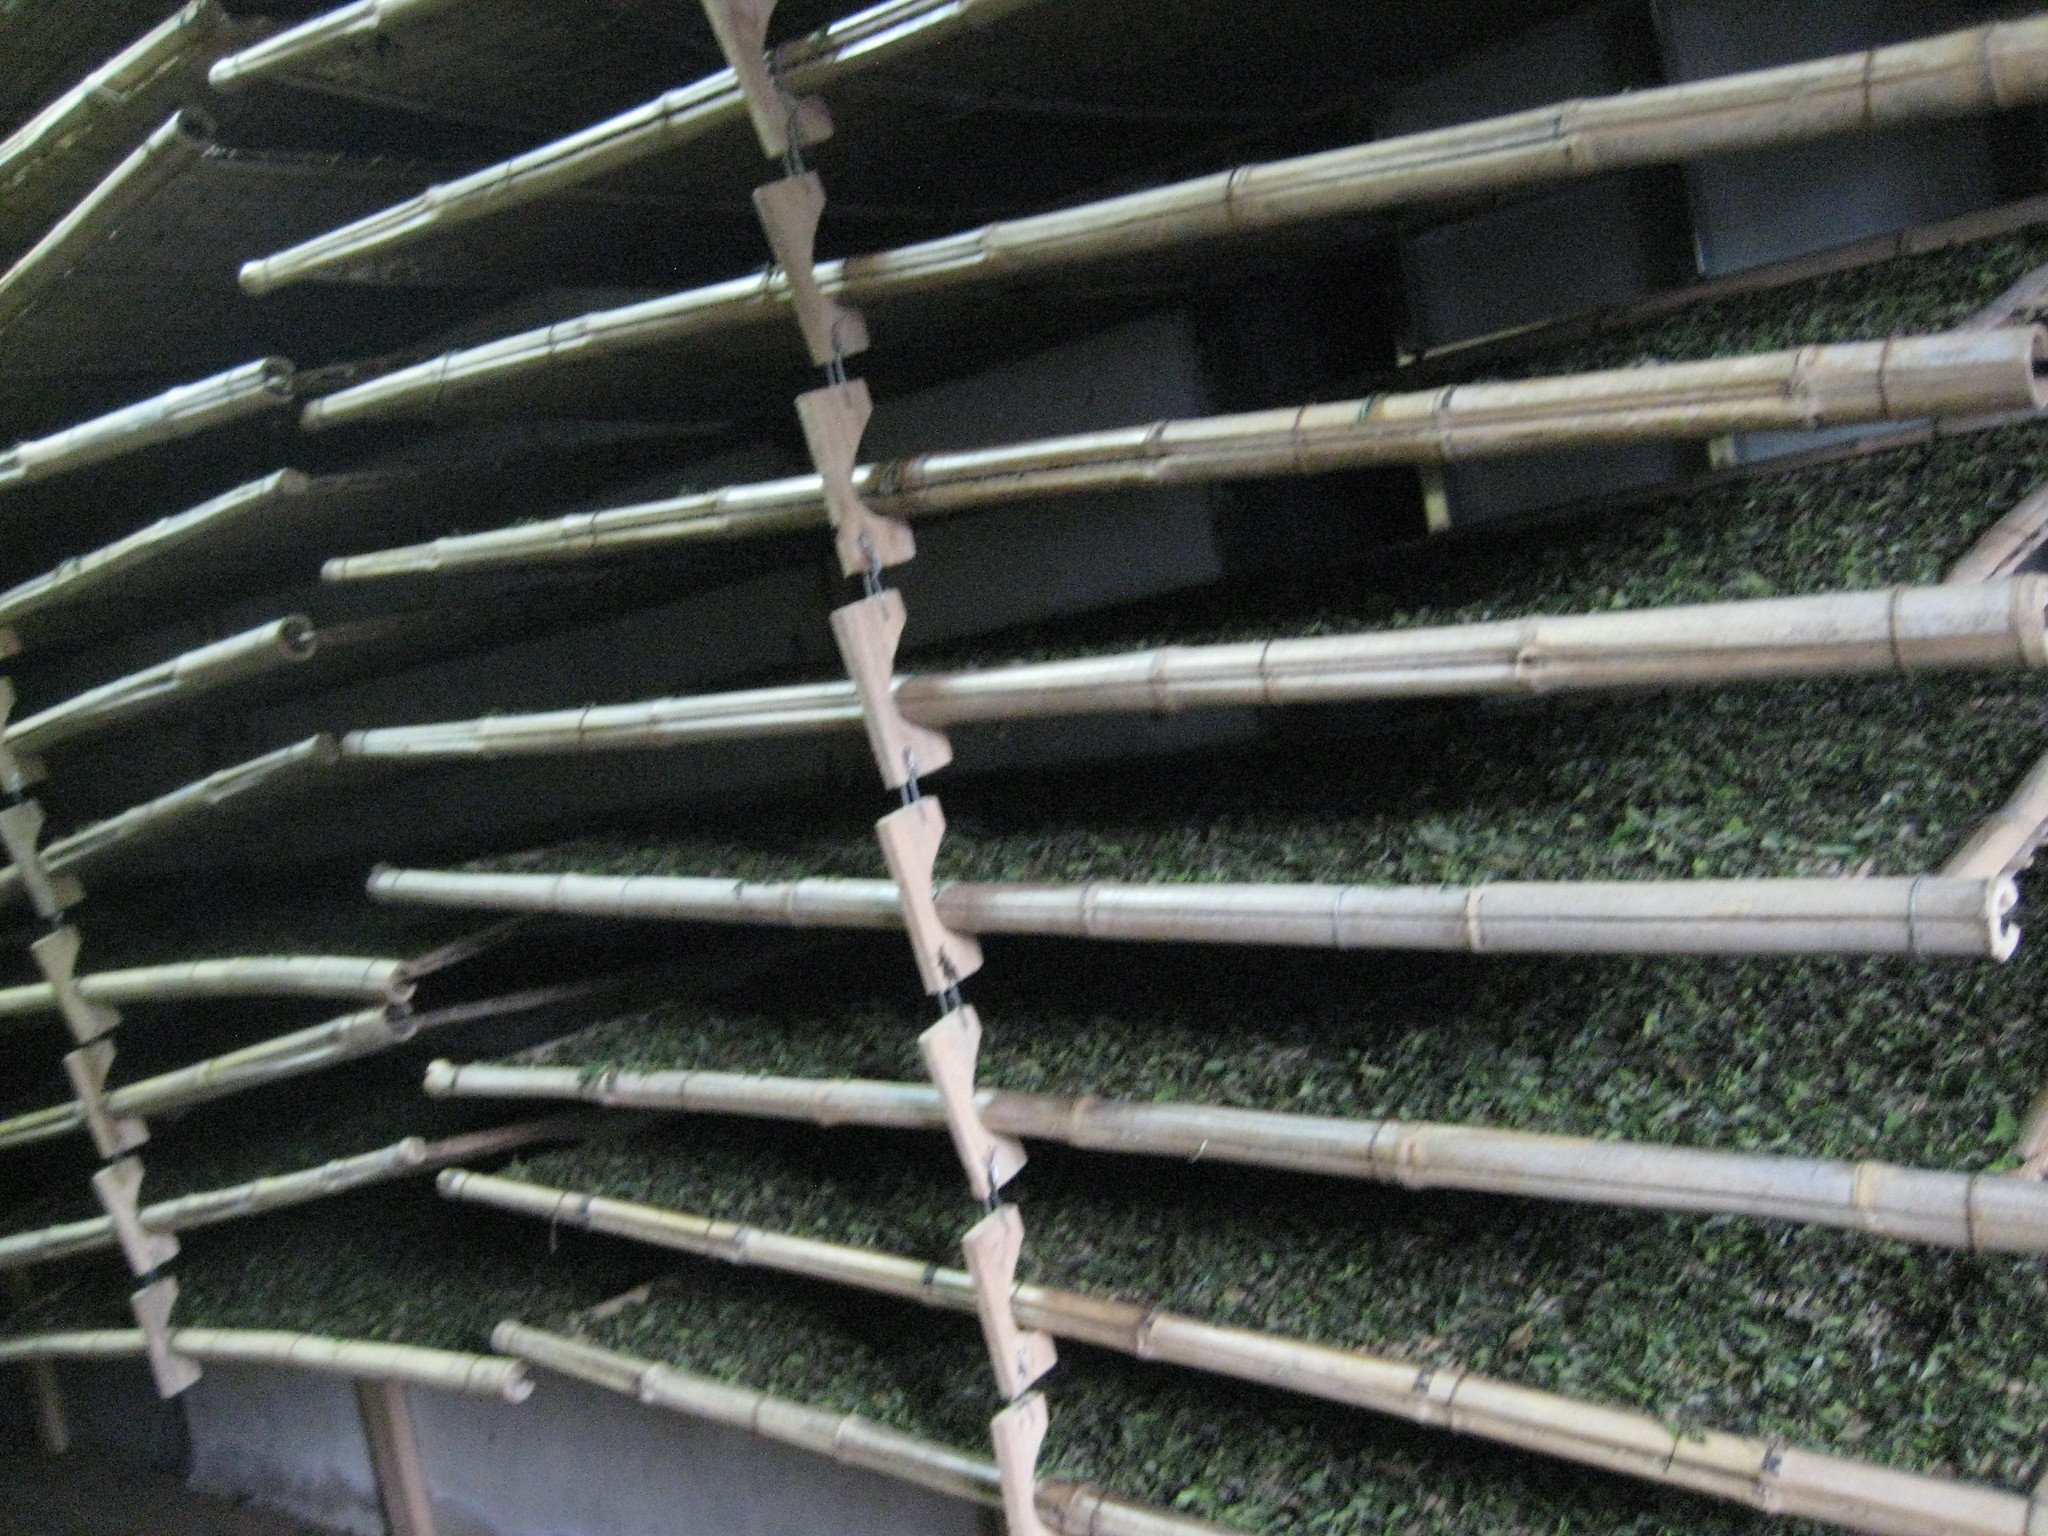 Tea Leaves Undergoing Controlled Oxidation